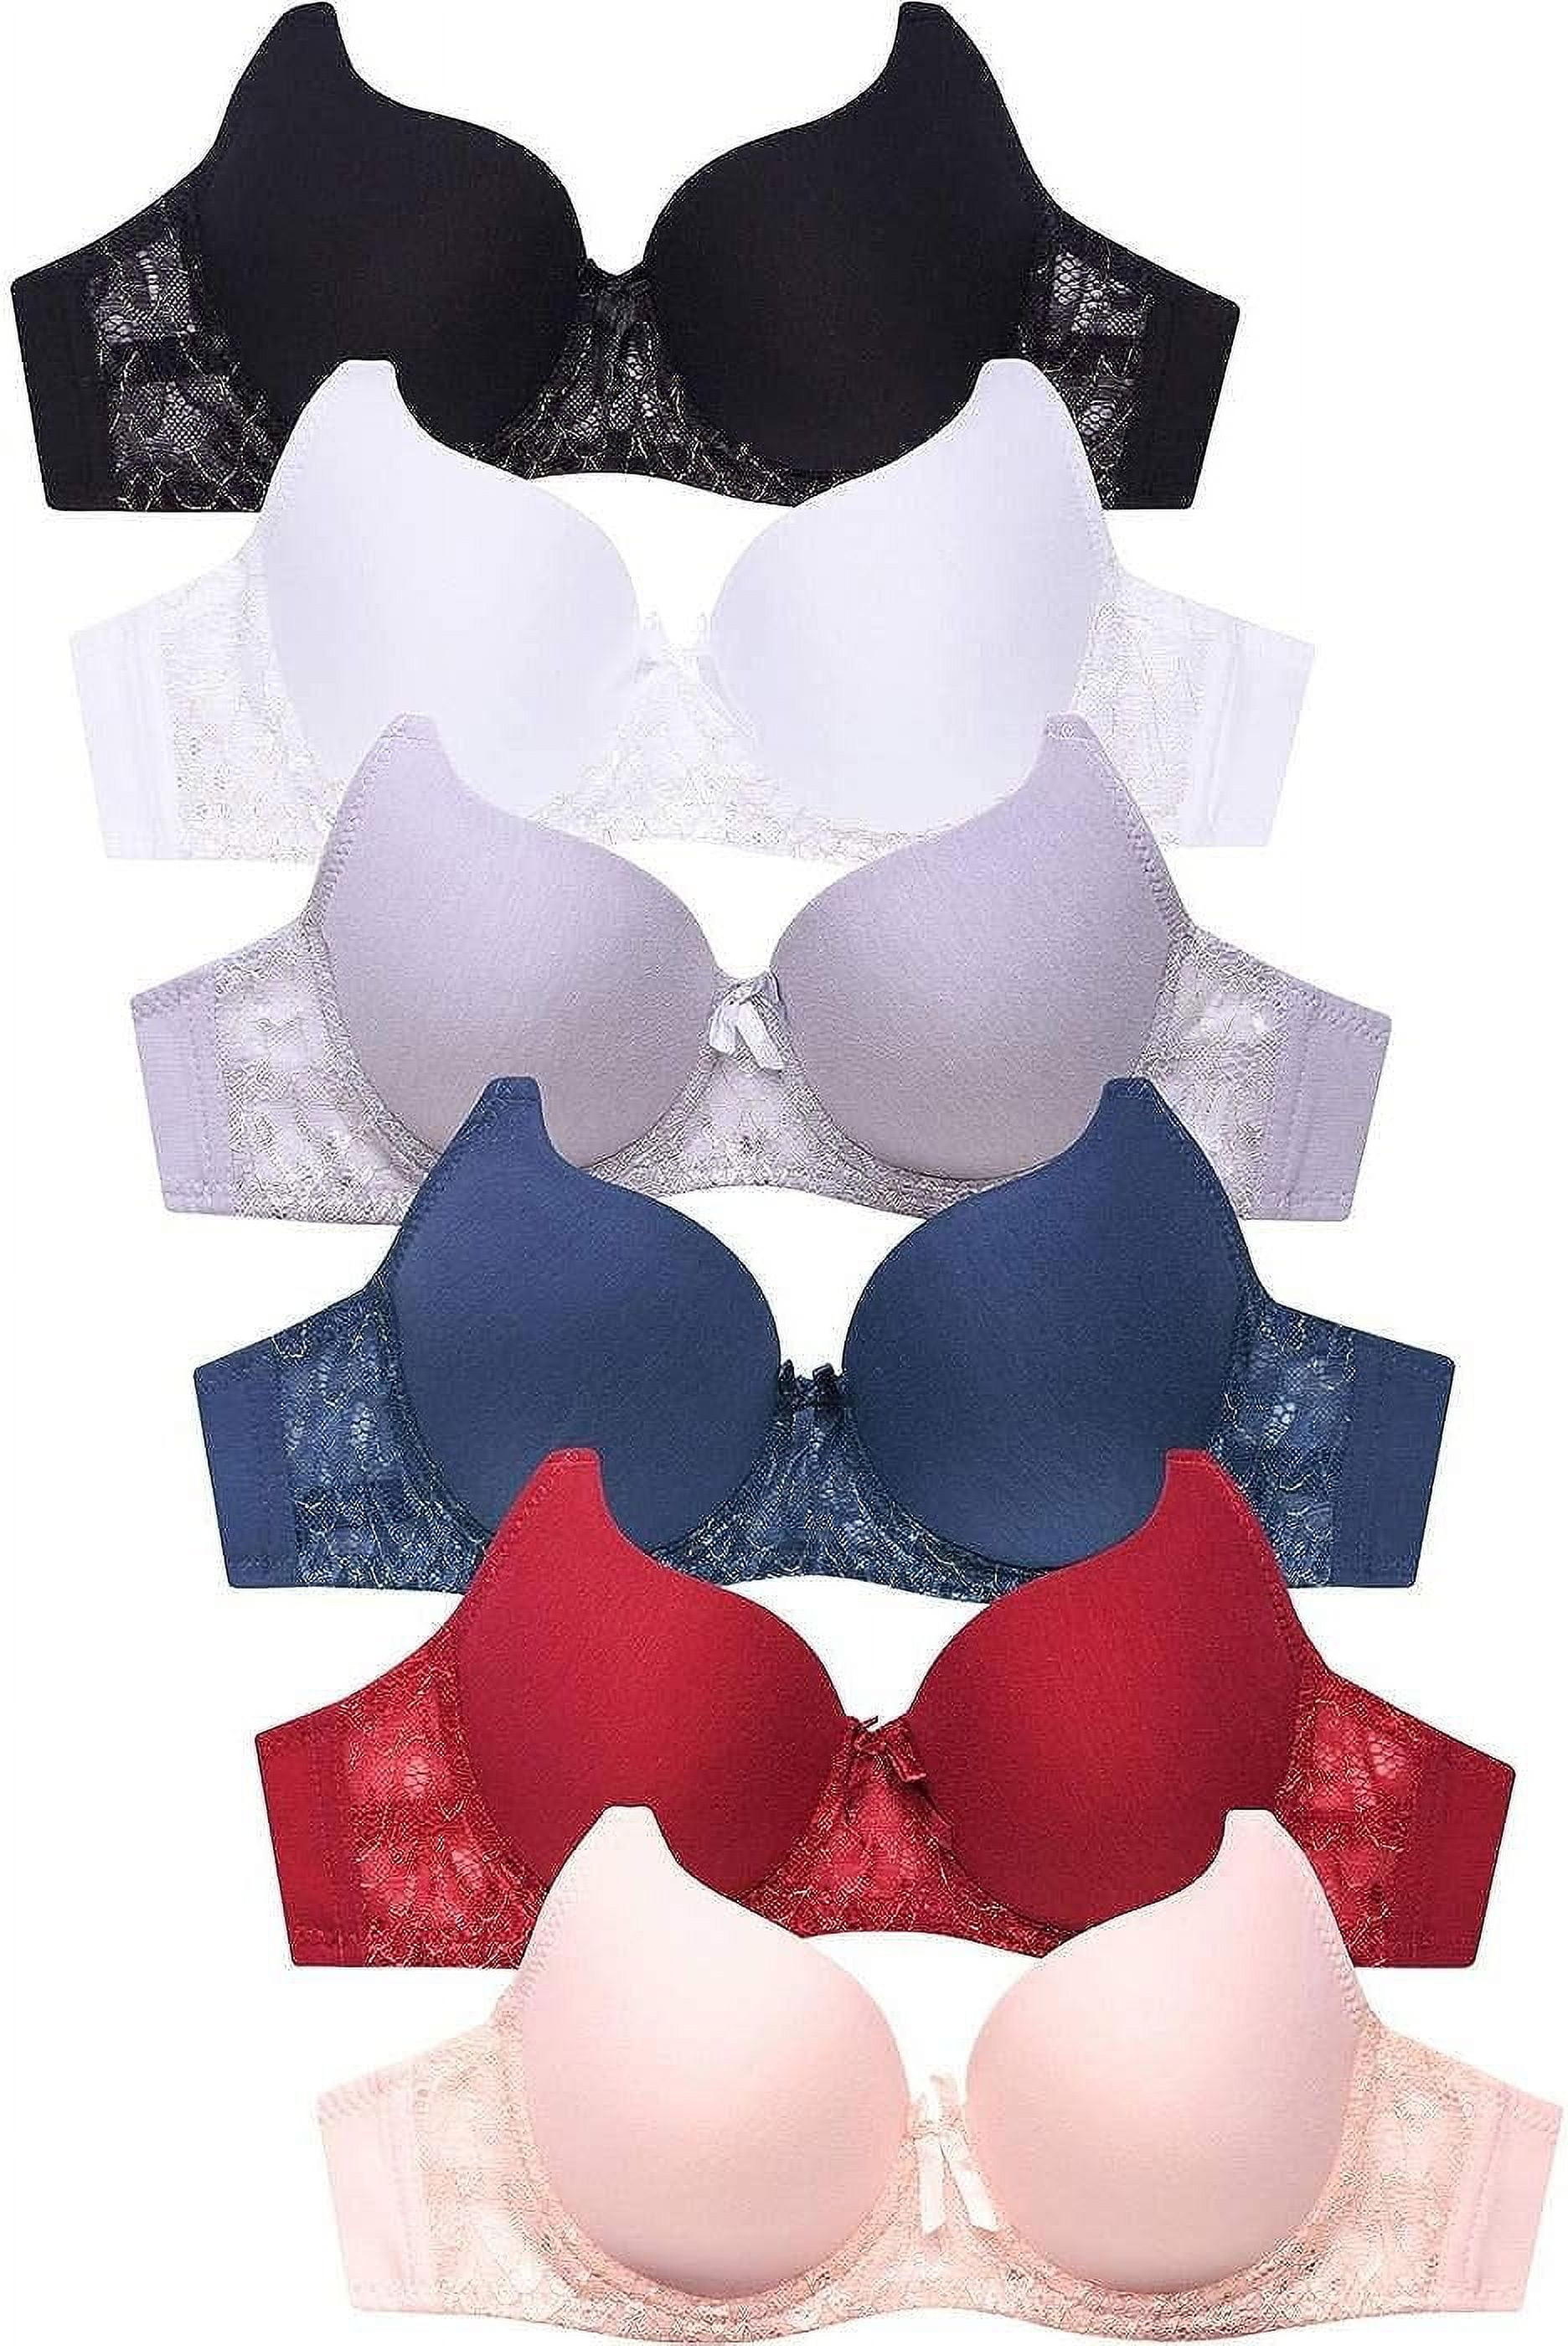 Mamia Womens 6 Multi Pack of Push Up Bras Floral Lace Padded